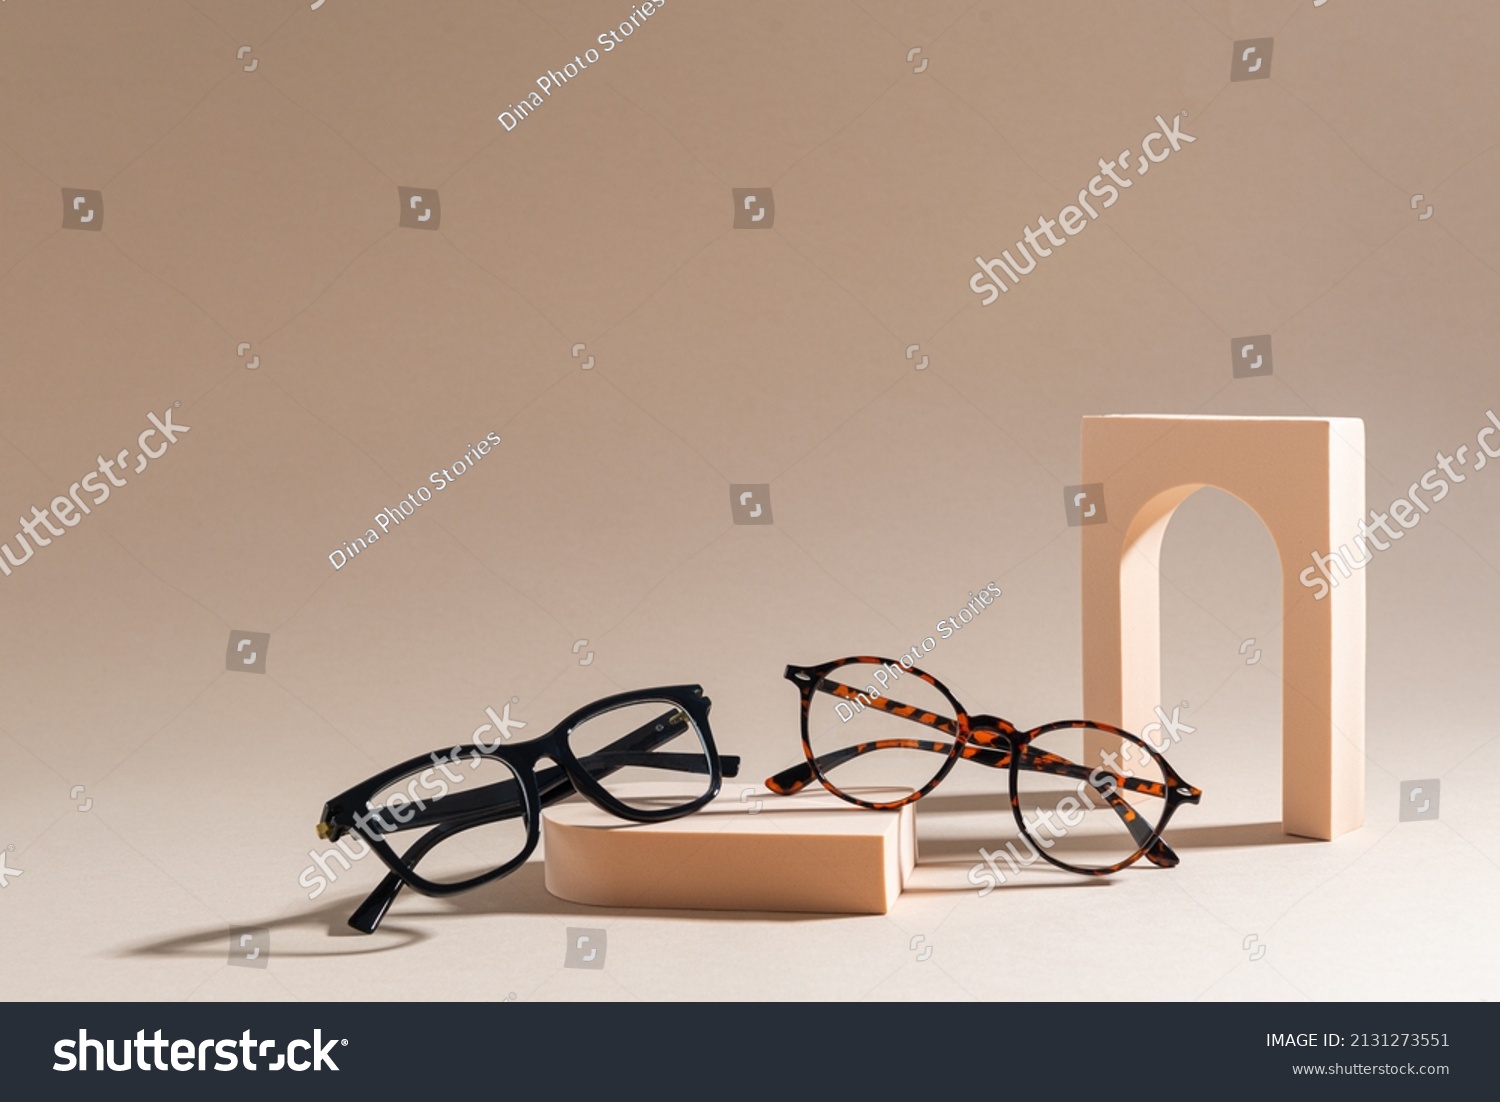 Two pairs of eyelass frames on beige background. Minimalism, summer fashion concept. Trendy eyeglasses still life in minimal stile. Optic store discount, sale. Copy space for text #2131273551